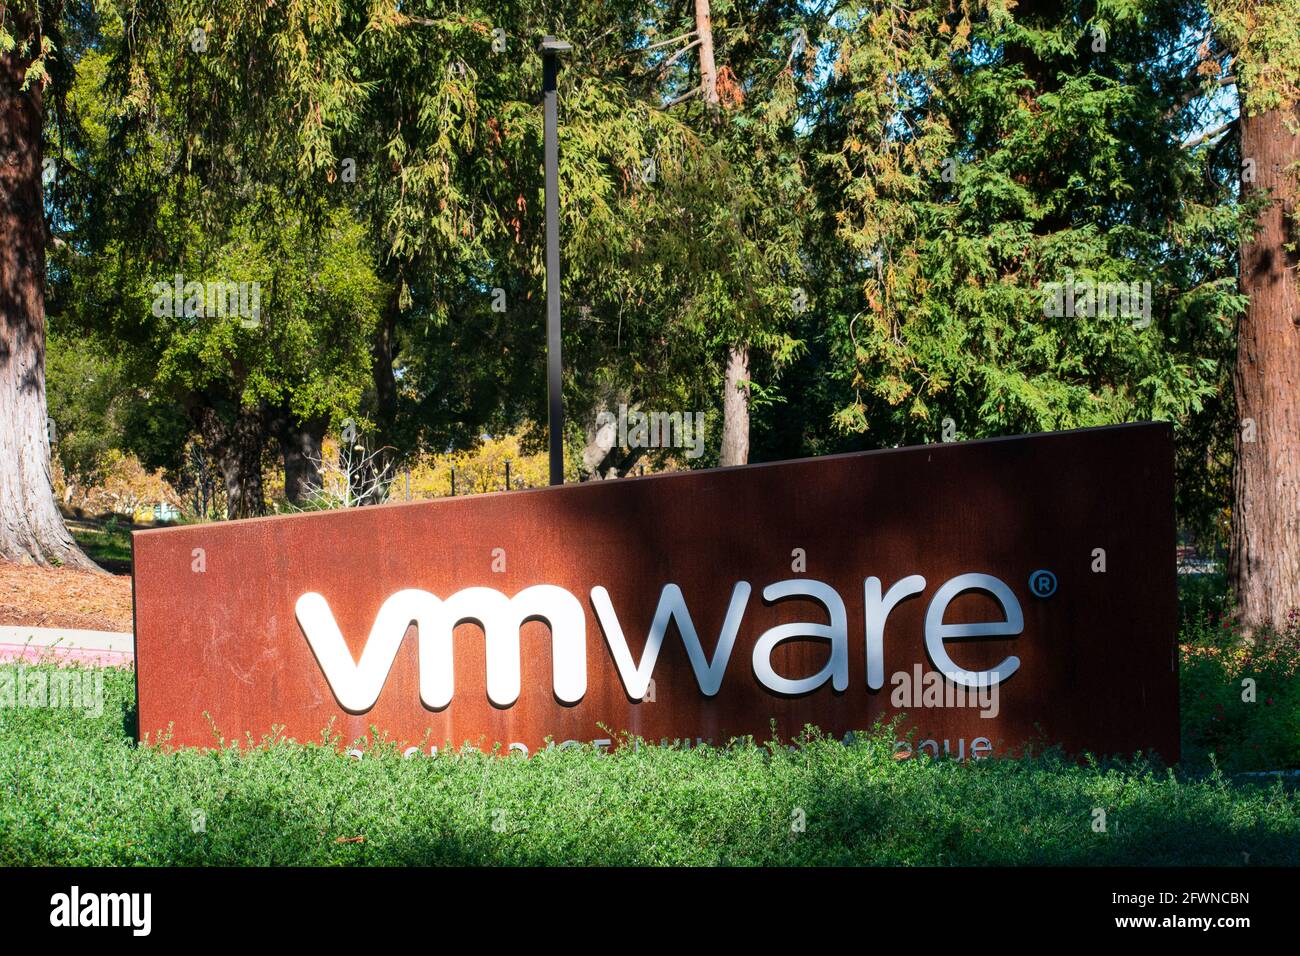 VMware sign on the entrance to campus headquarters in Silicon Valley. VMware is a subsidiary of Dell Technologies - Palo Alto, California, USA - 2020 Stock Photo